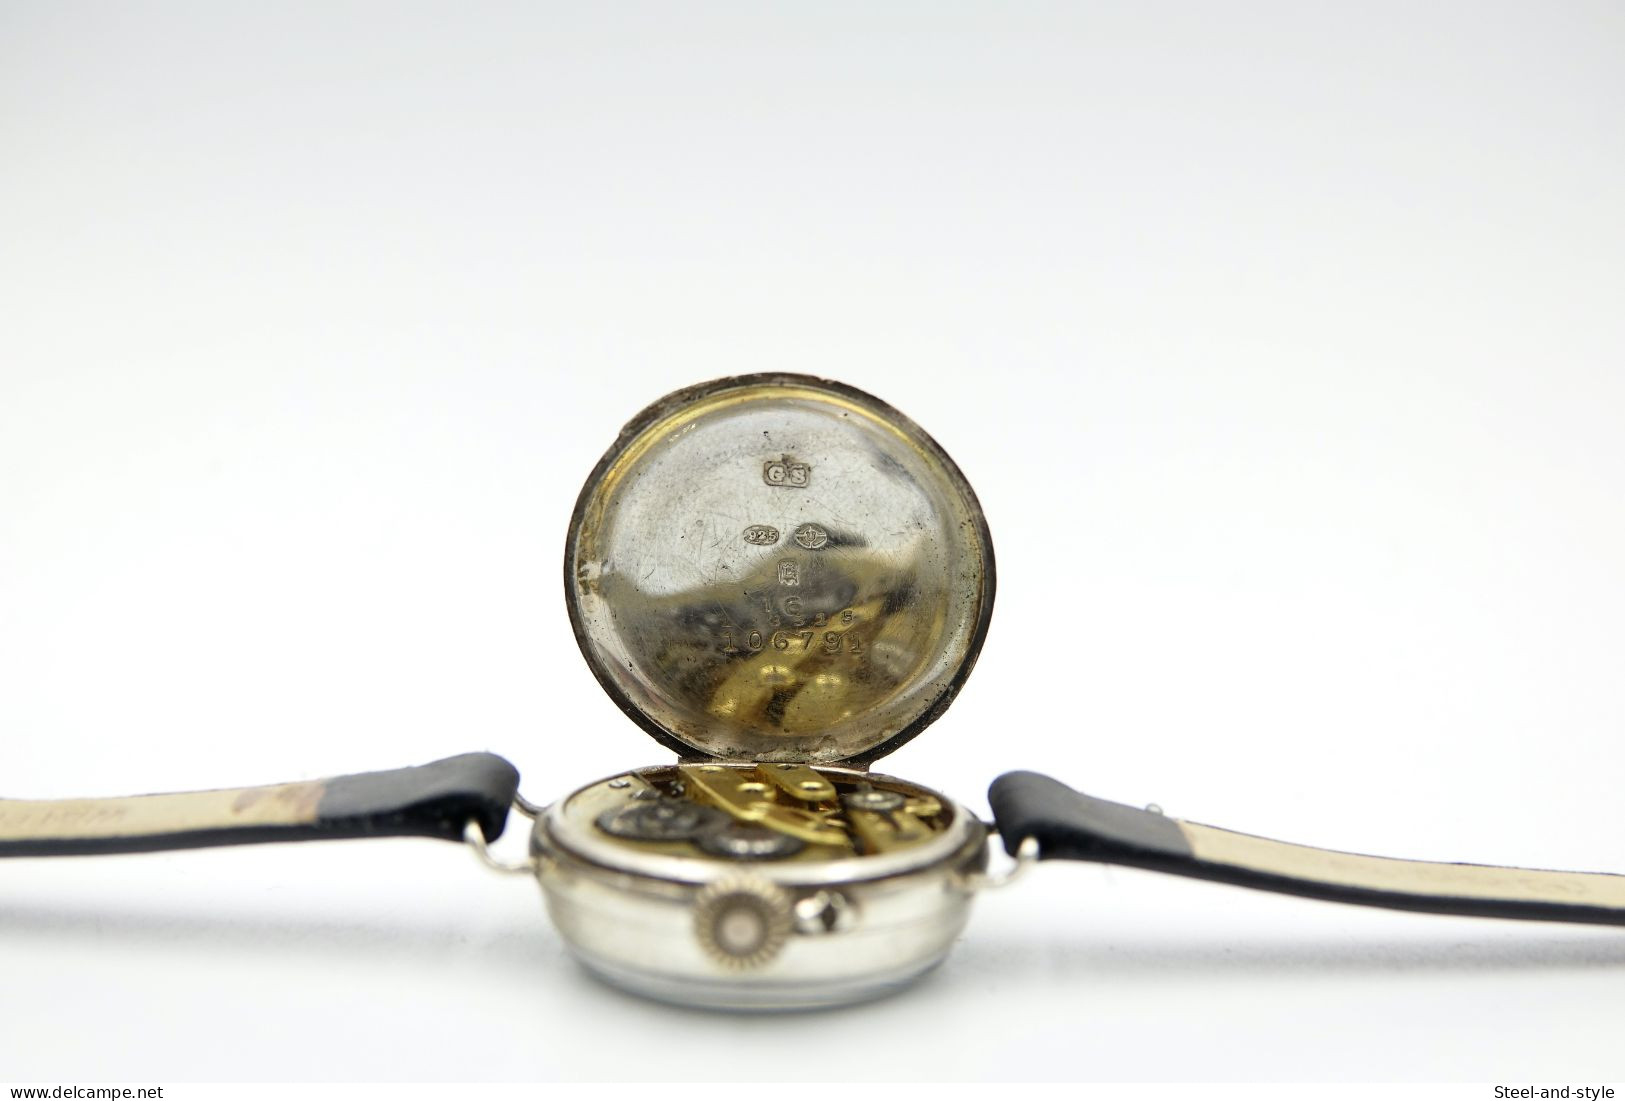 Watches : GS STERLING SILVER TRENCH WW1 - 925 - Case Made In England - Hand wind - Running - 1900's